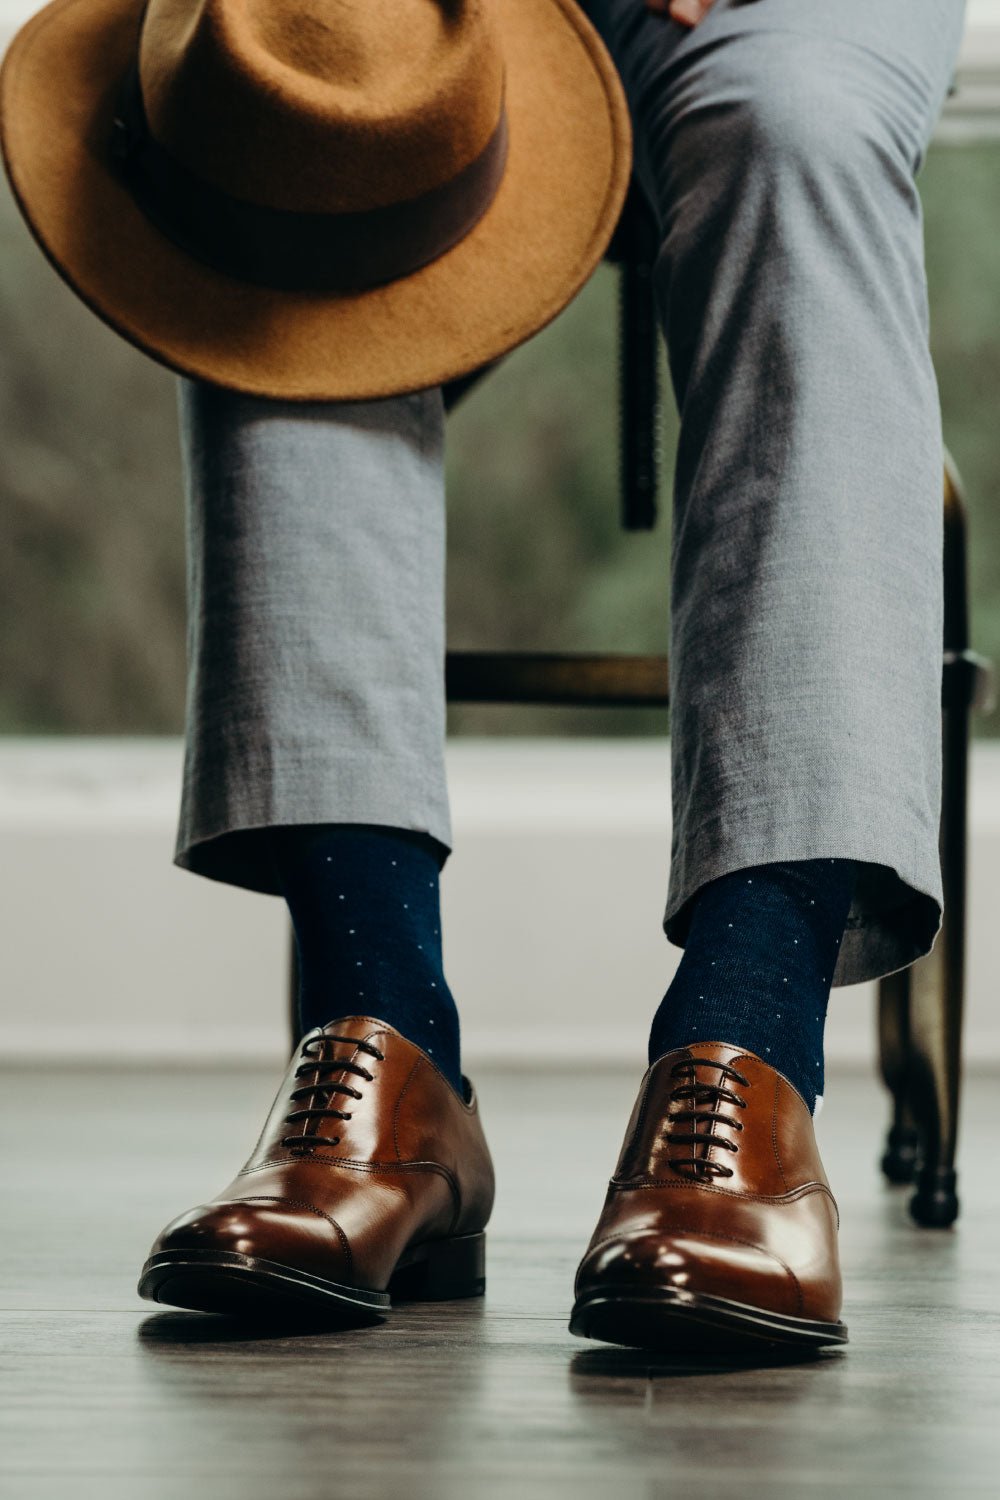 THE BEST SOCKS FOR YOUR WARDROBE | WHY MATERIALS MATTER